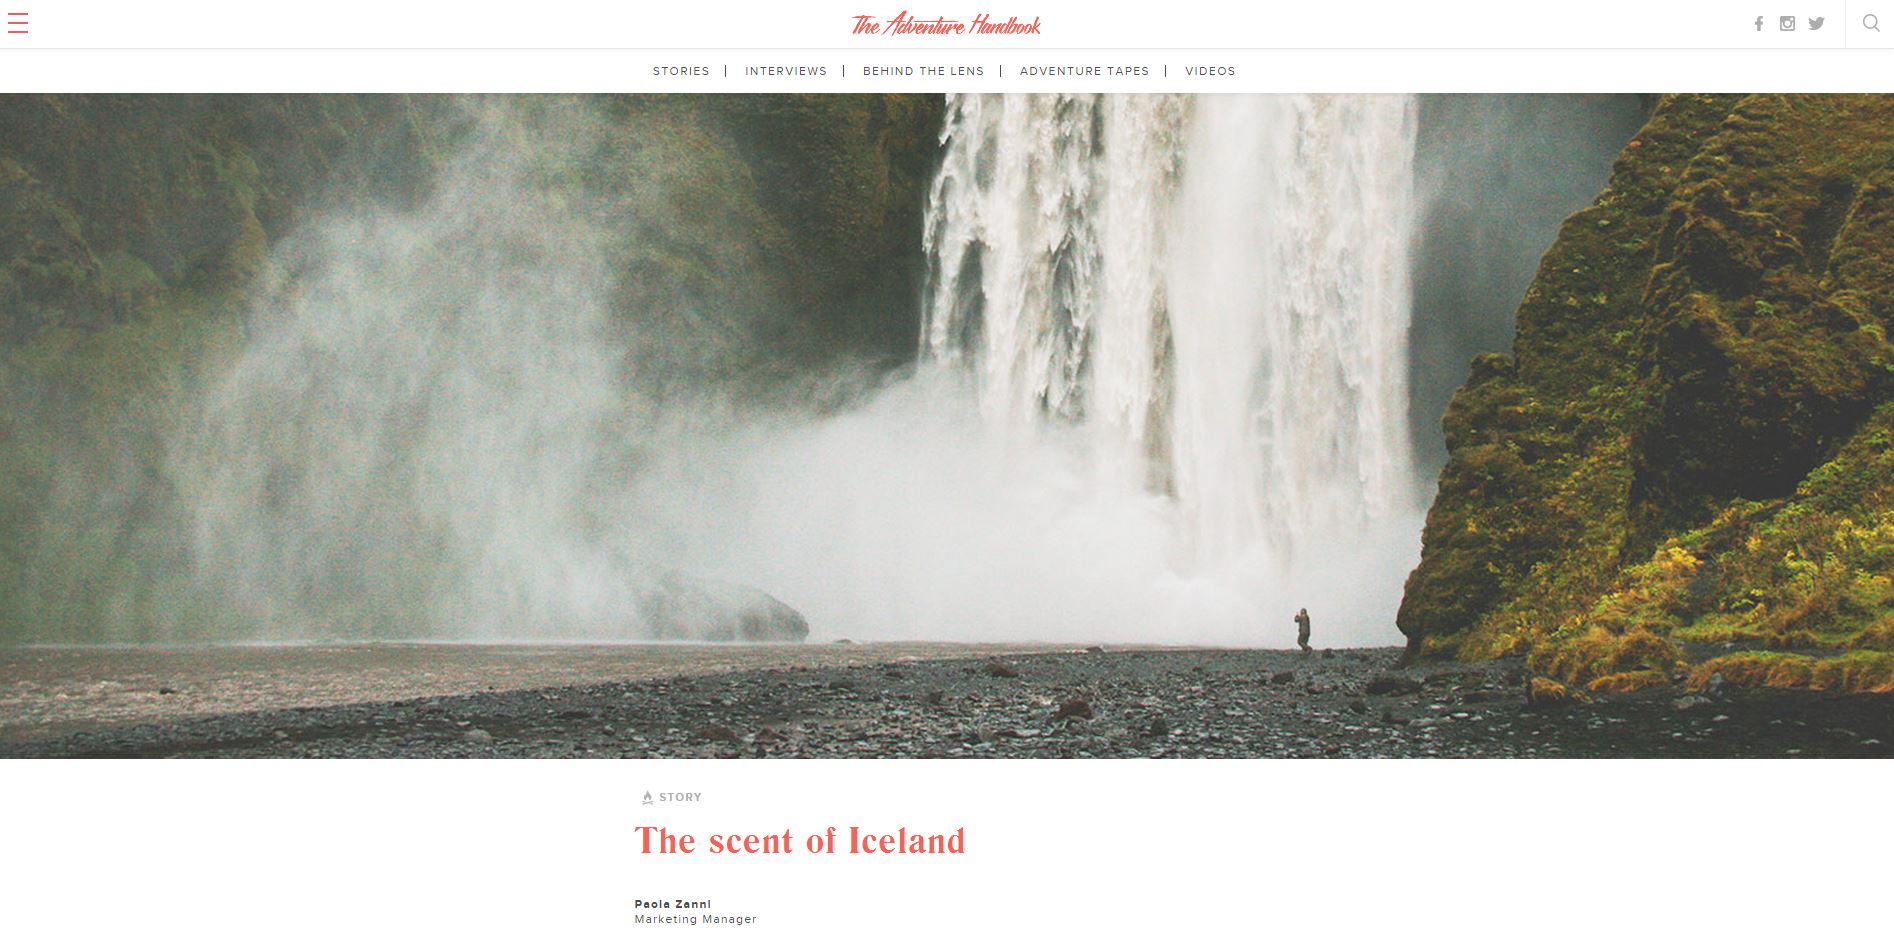 "The Scent of Iceland" in The Adventure Handbook, May 2016